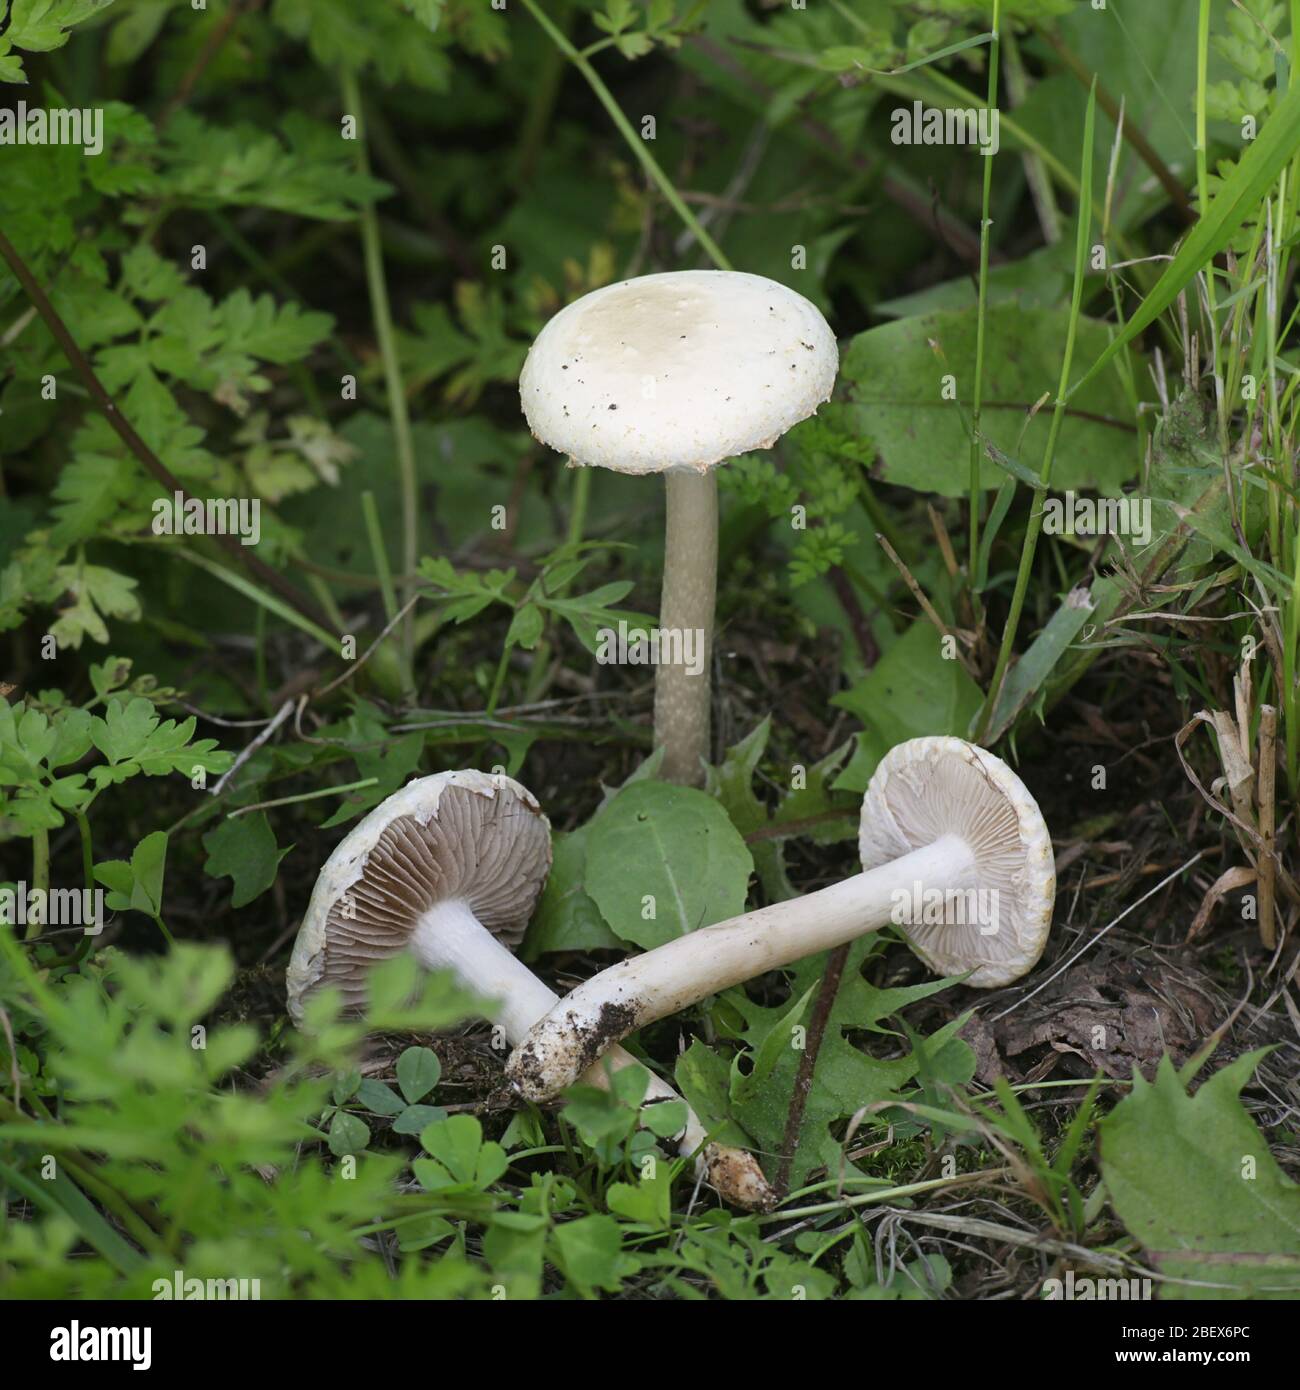 Agrocybe dura, known as the Bearded Fieldcap, growing wild in Finland Stock Photo